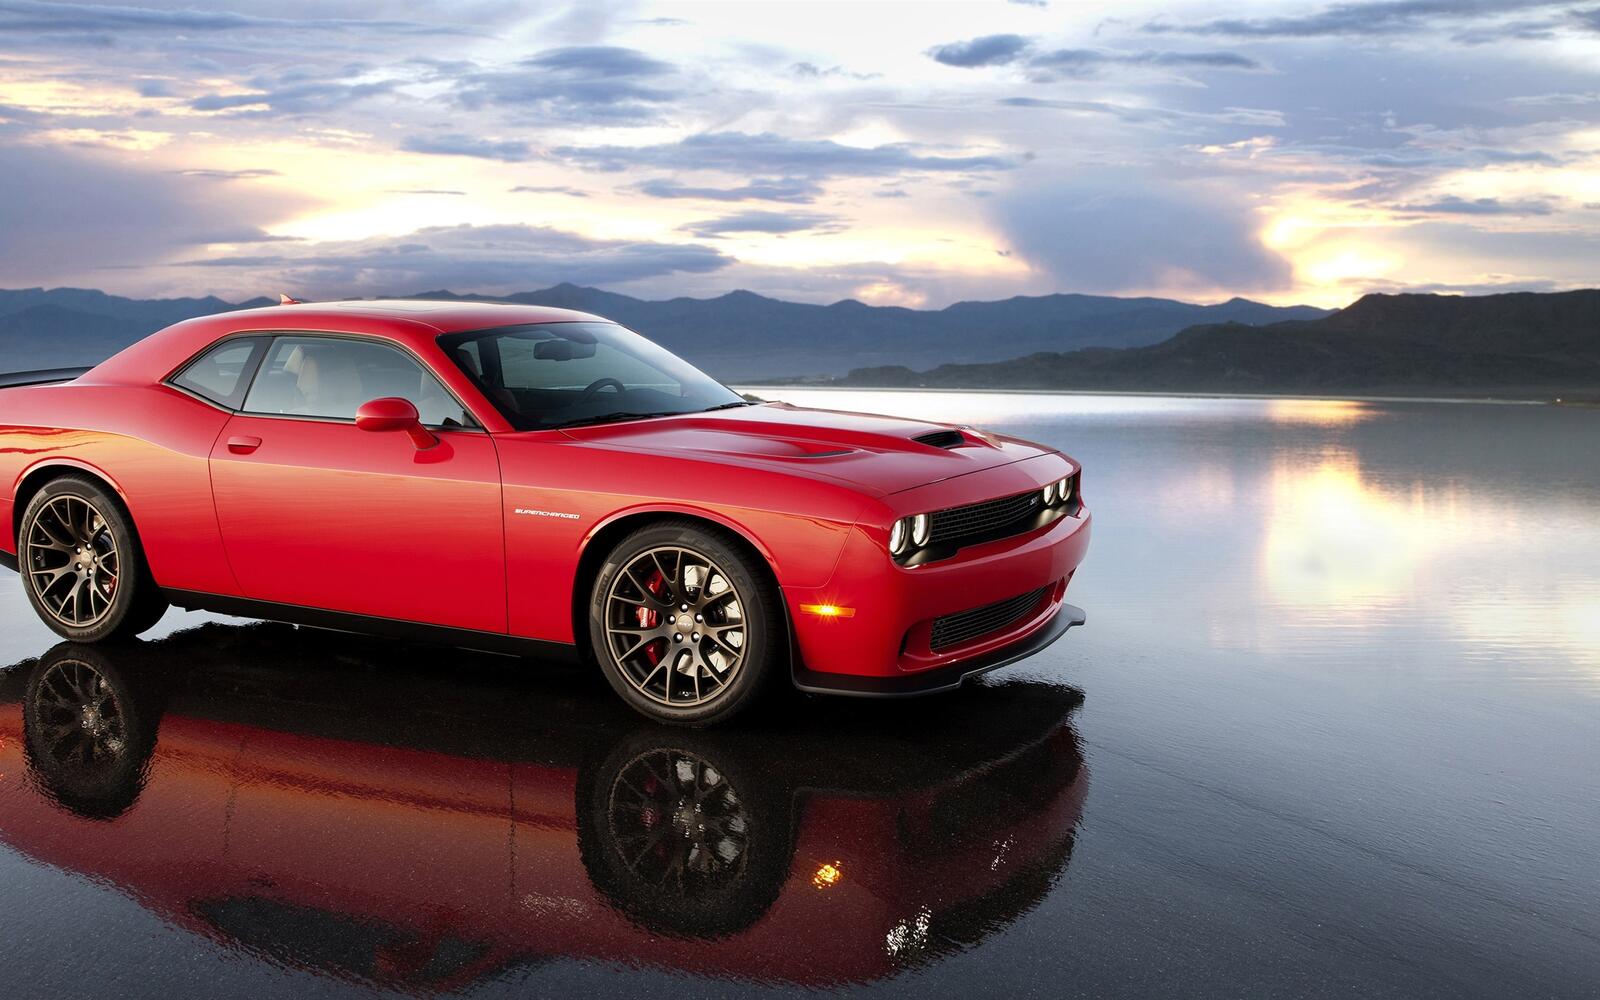 Wallpapers lake red Dodge Challenger on the desktop